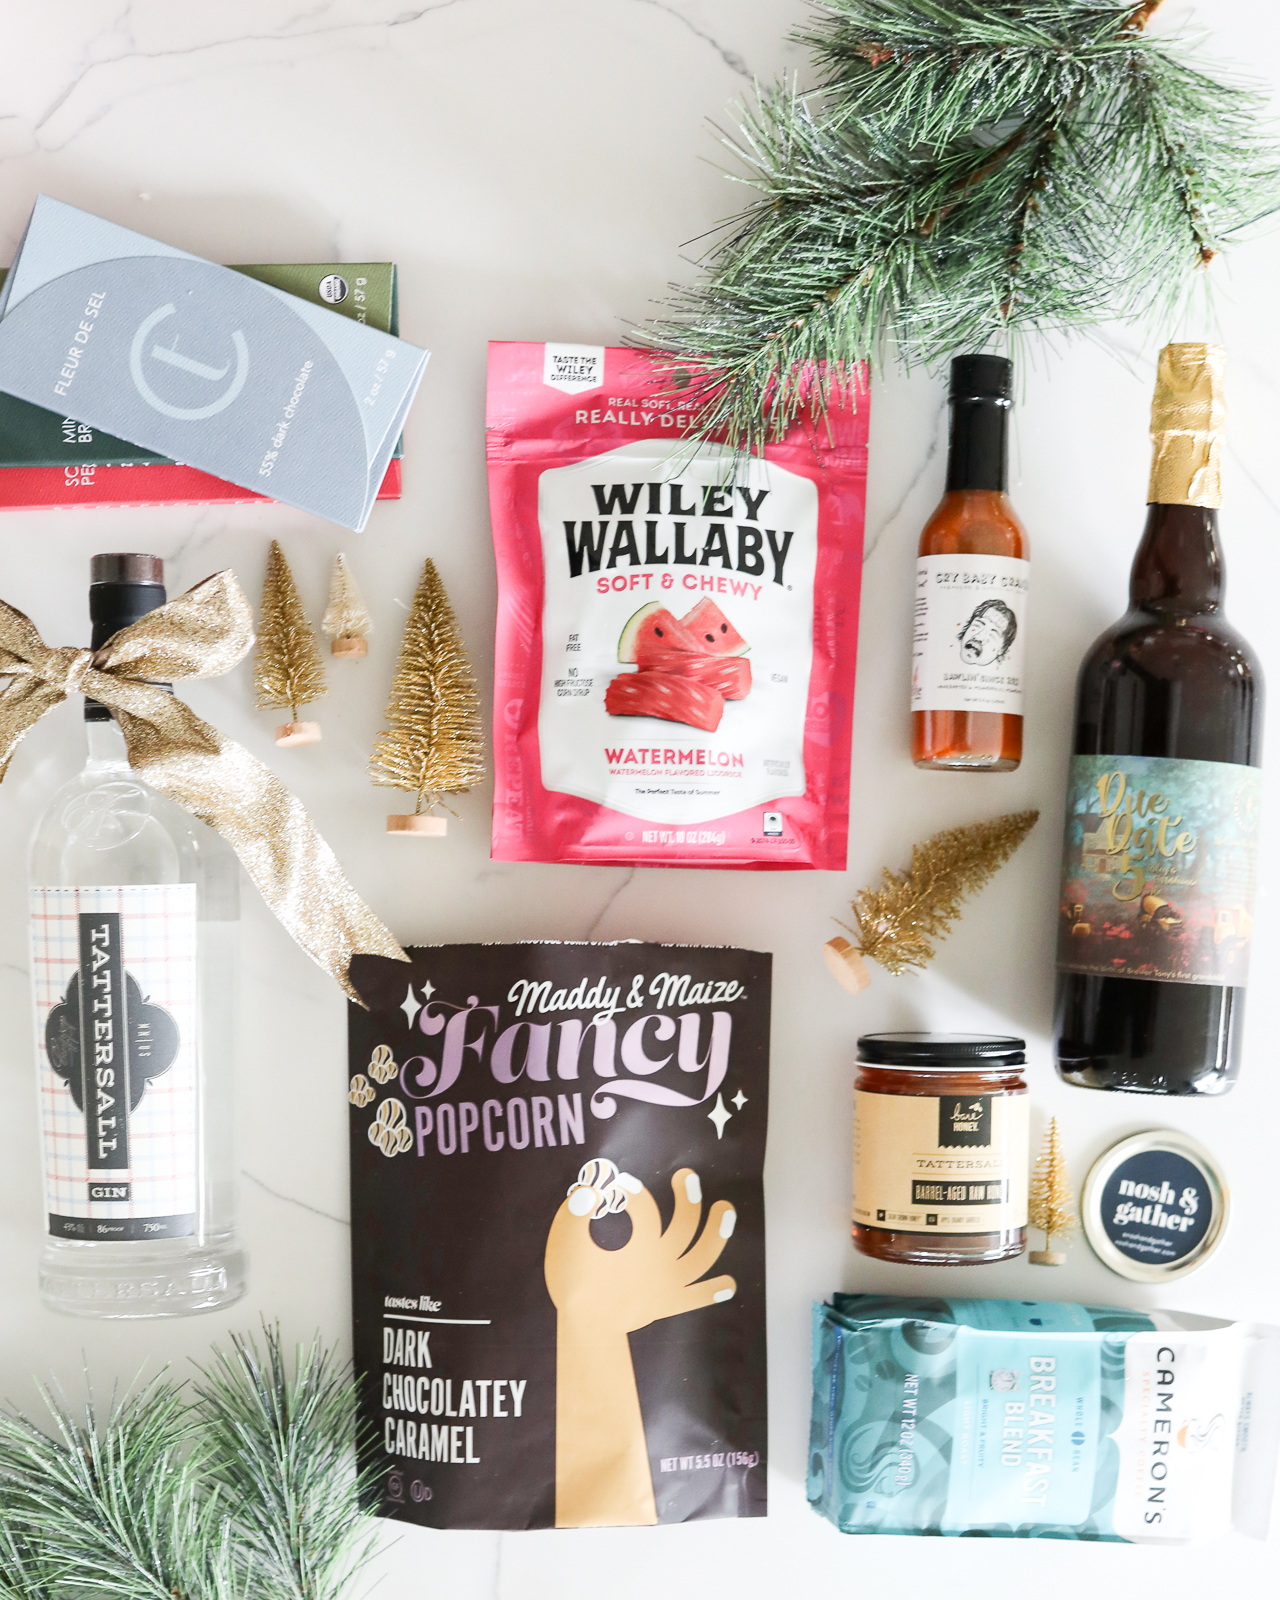 The Best Minnesota Gifts: Food & Drink